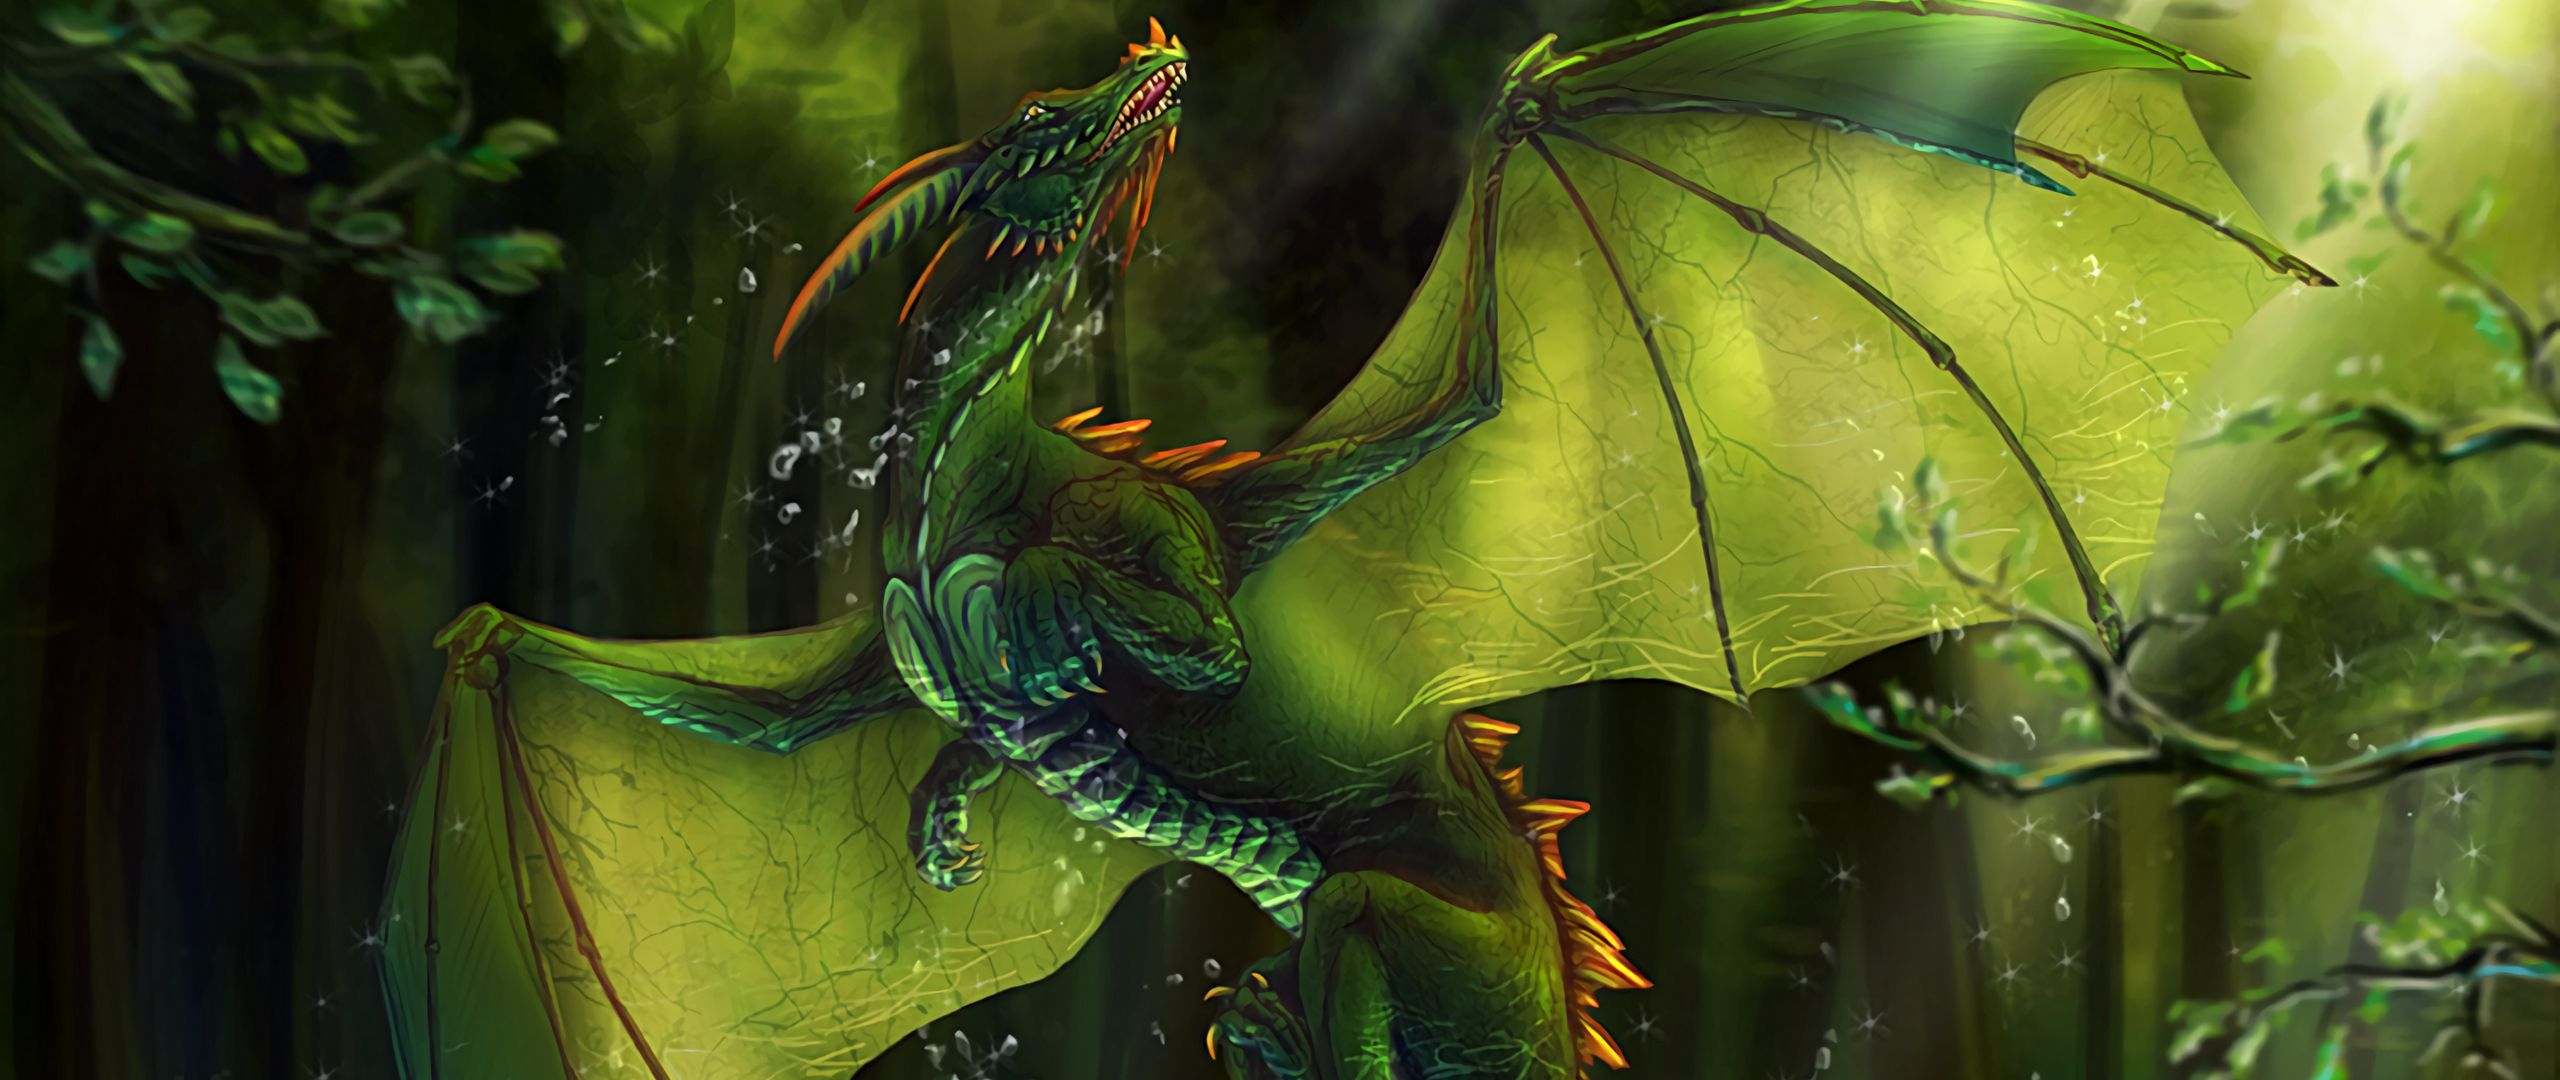 Download wallpaper 2560x1080 dragon, lake, forest, water, art dual wide 1080p HD background